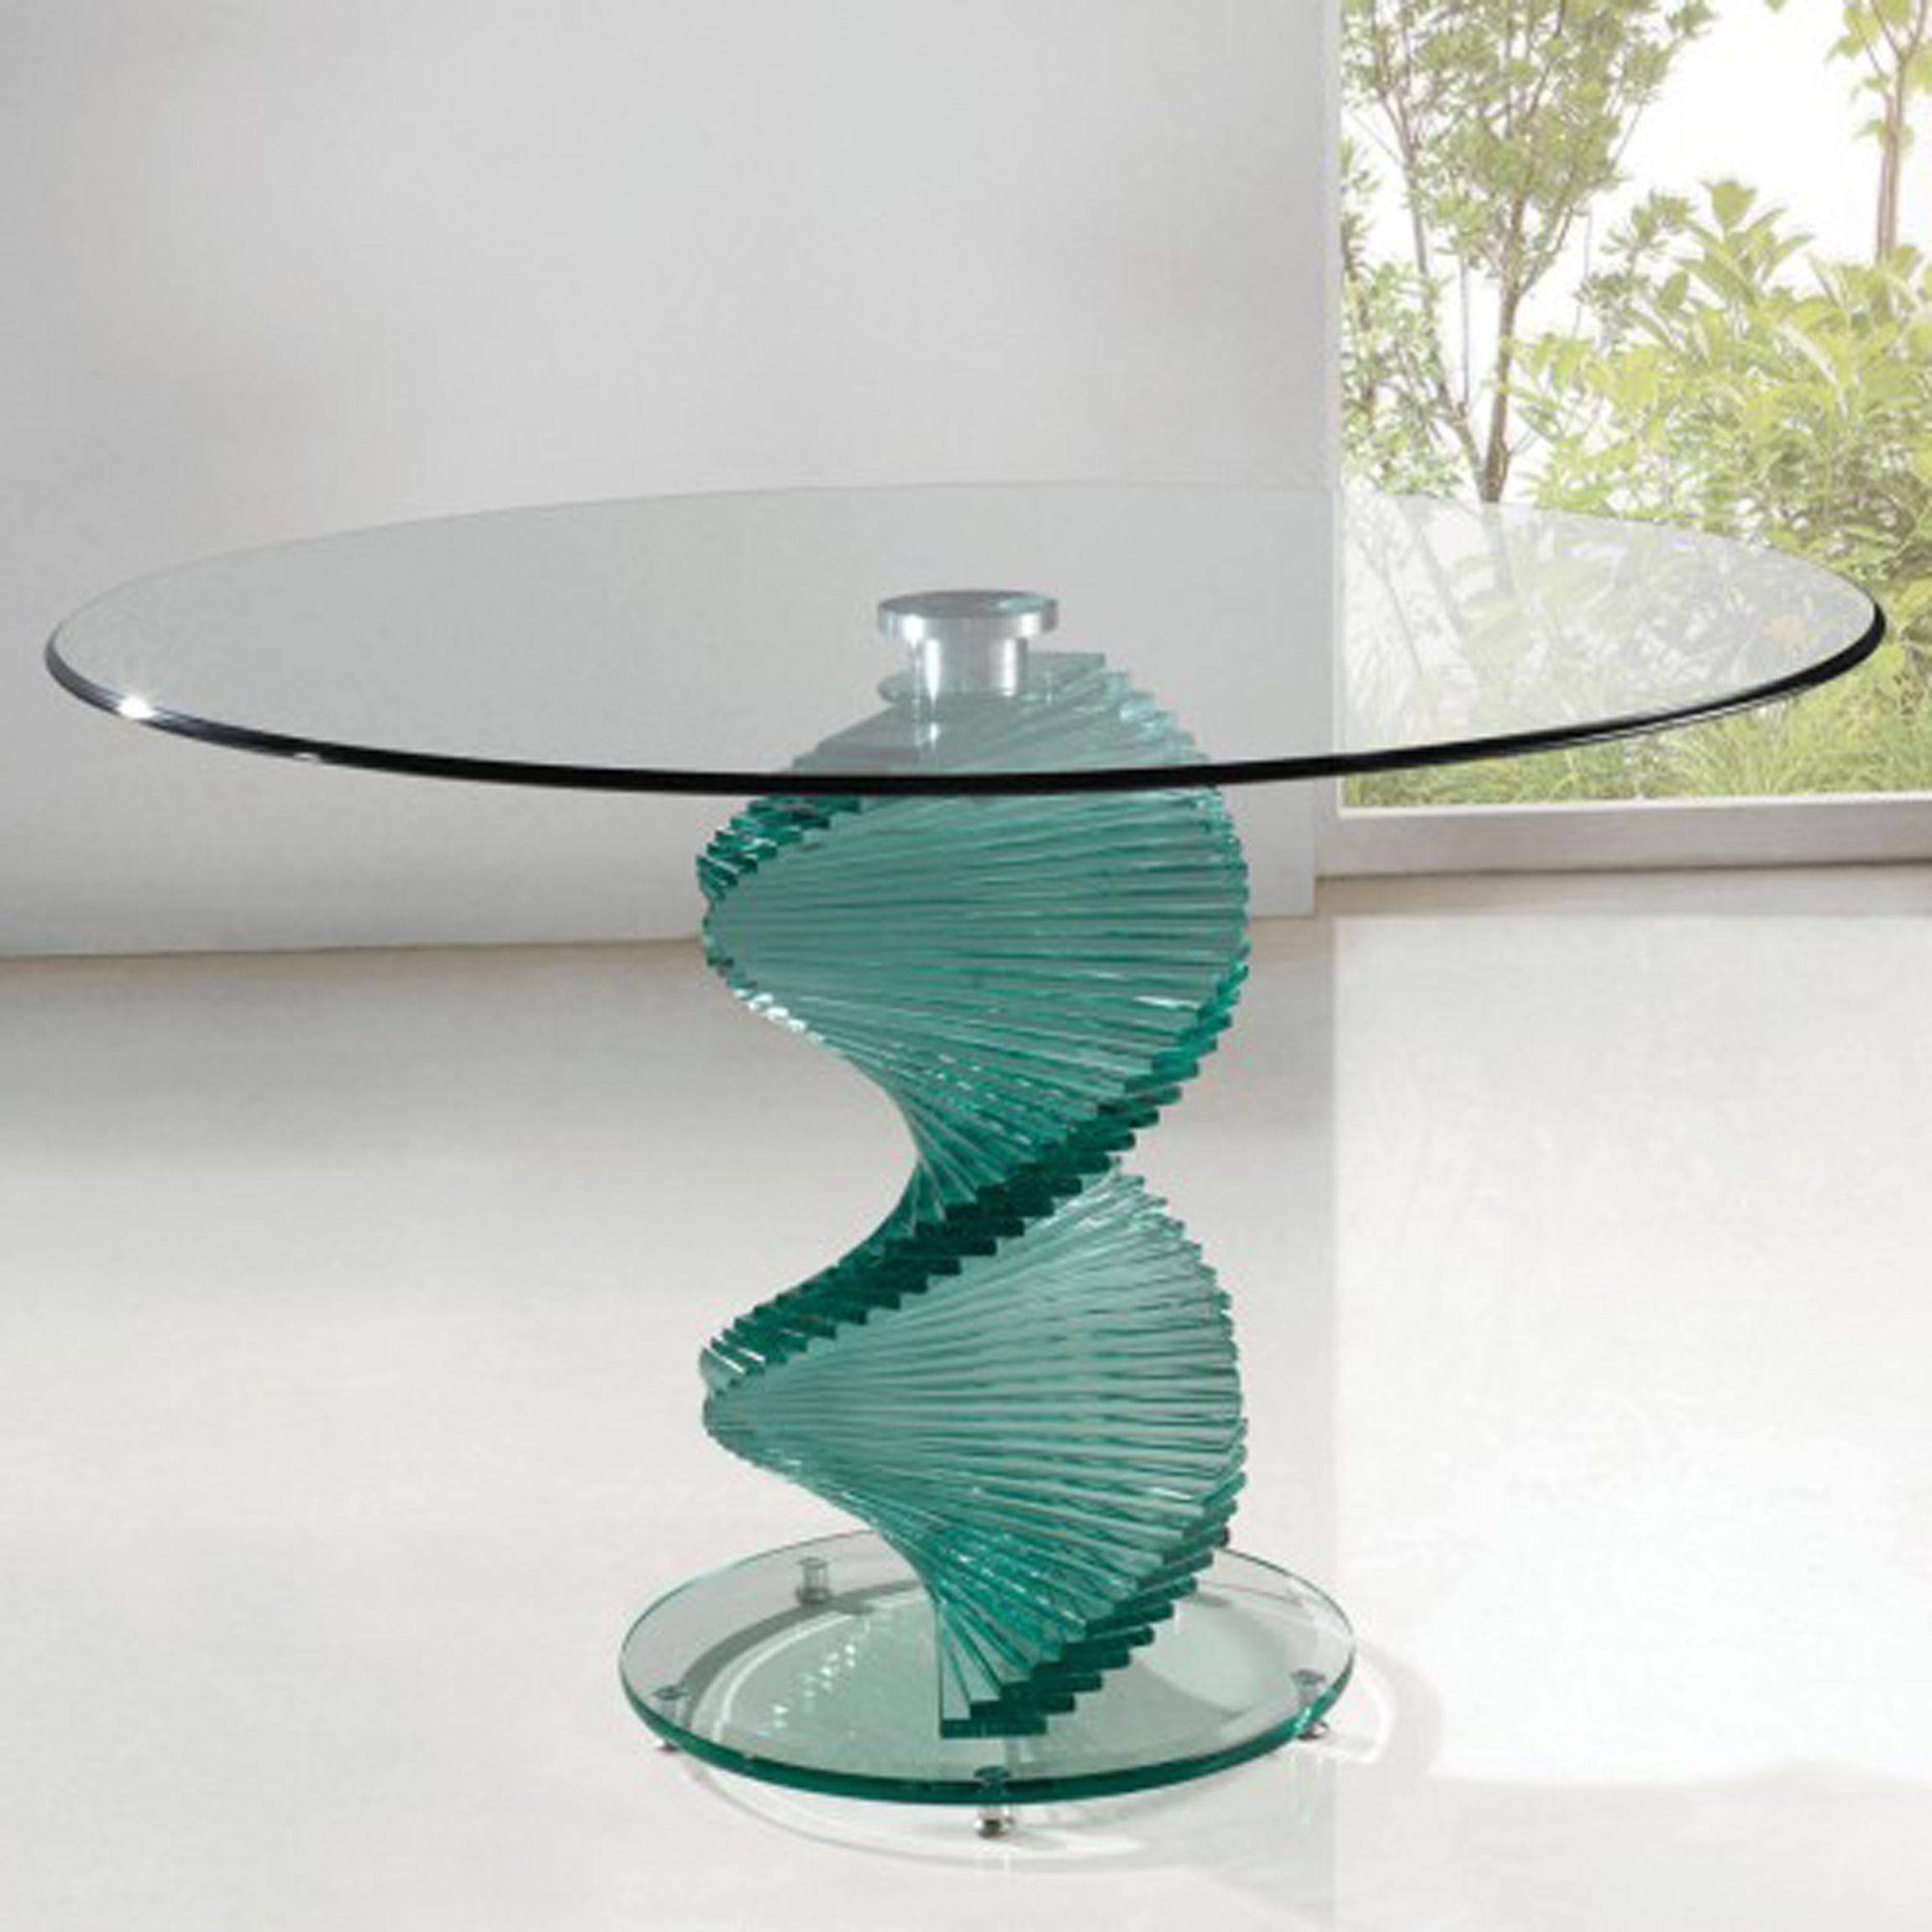 Dining Room Furniture Sets Of Modern Round Top Glass For Dining Table Set With Unique Green Glass Spiral Table Leg Ideas (View 24 of 28)